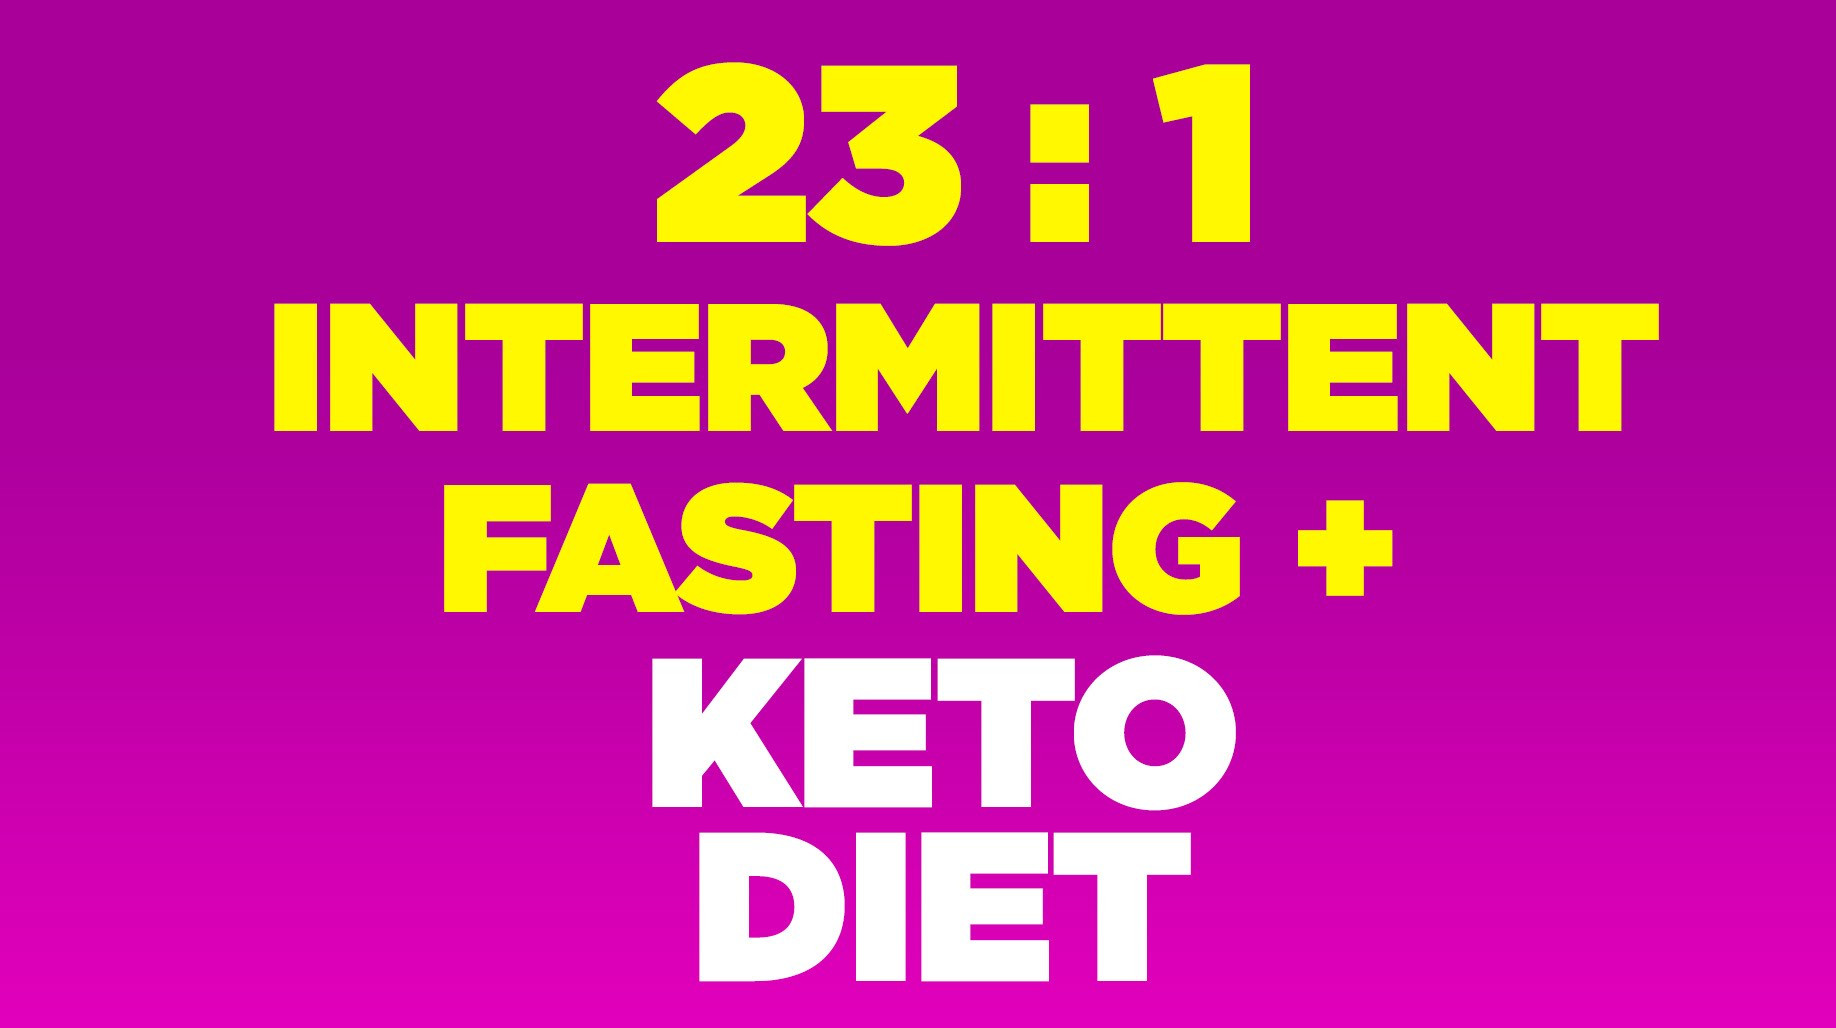 Keto Diet And Intermittent Fasting
 30 DAYS OF 23 HOURS Intermittent Fasting 23 1